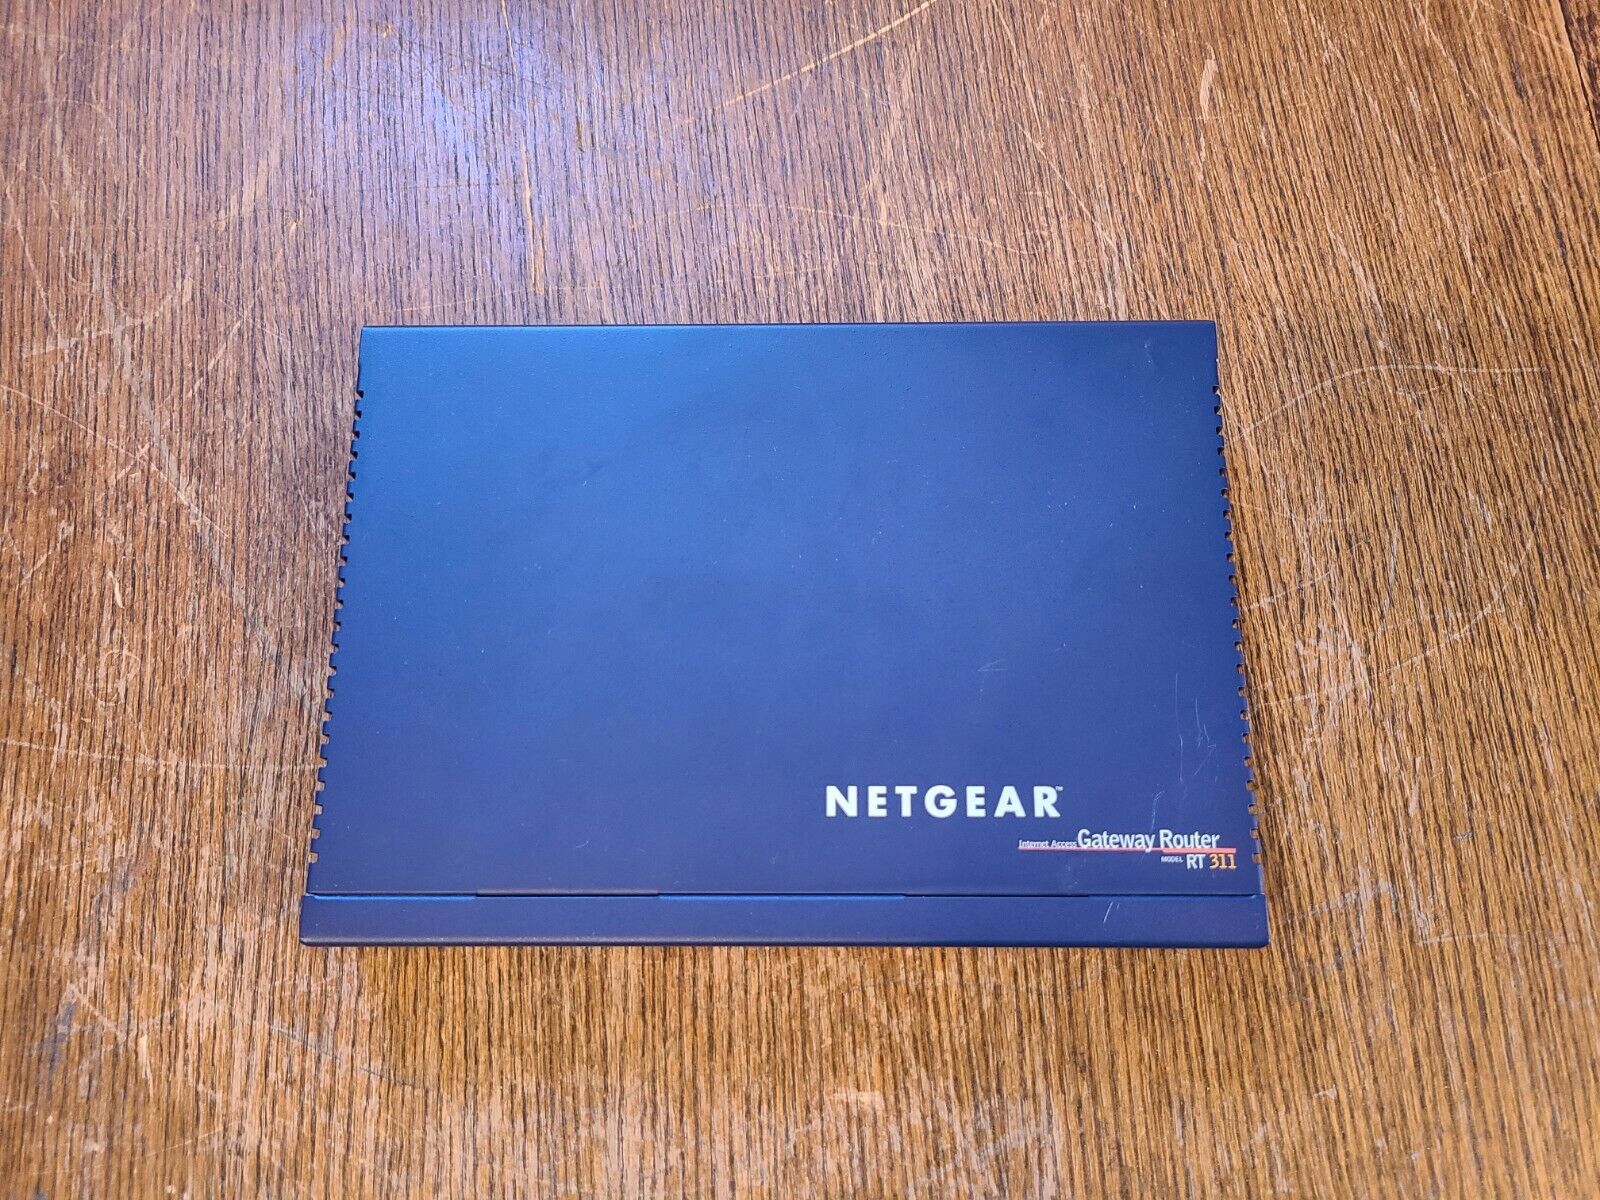 Netgear RT311 Internet Access Gateway Router (No Cords Included)